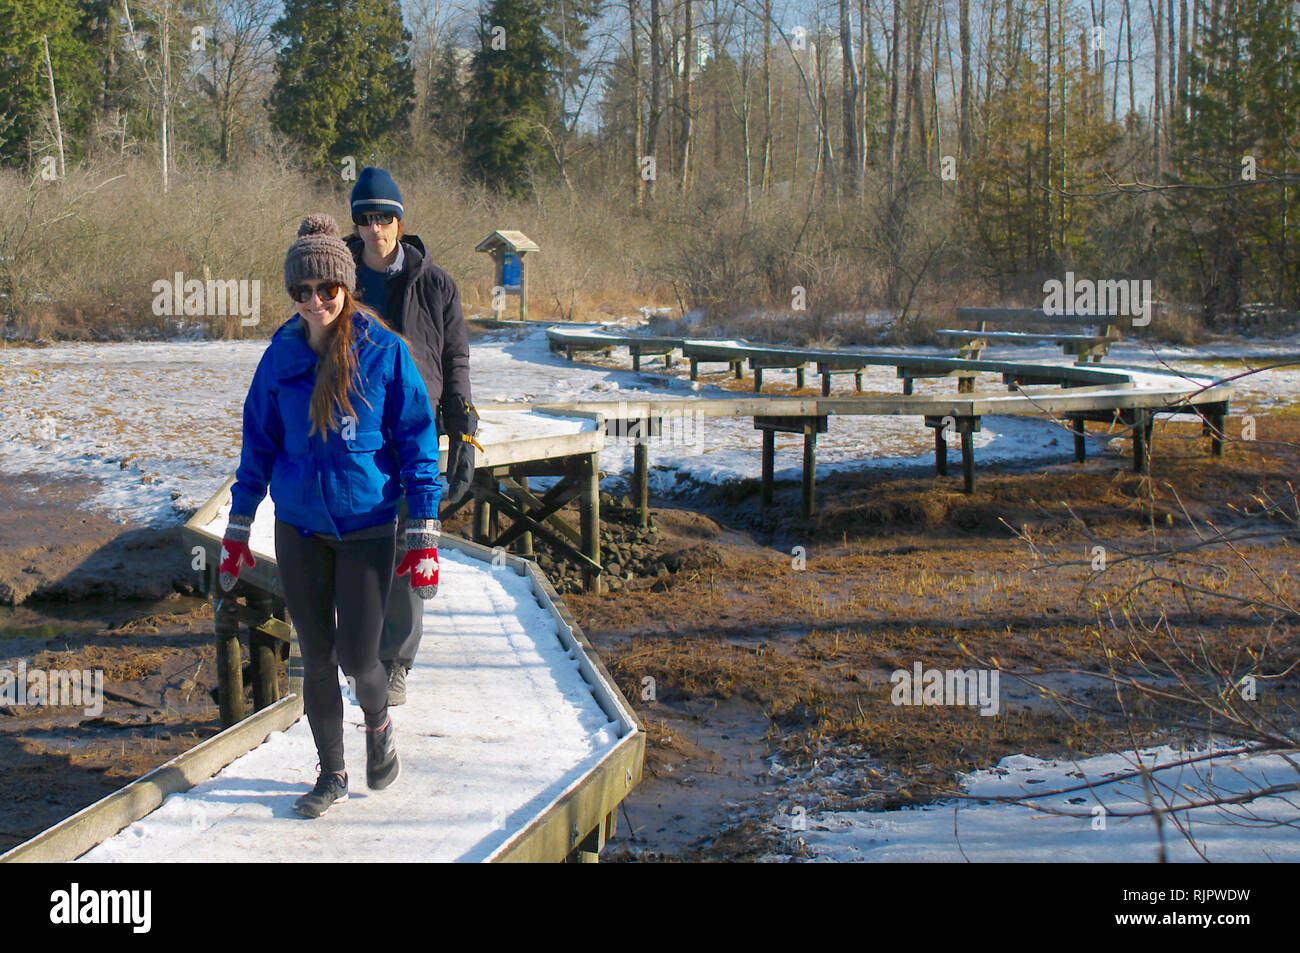 A smiling young couple walking the snowy boardwalk edging the mudflats at Shoreline Park, Port Moody, British Columbia, Canada. Stock Photo